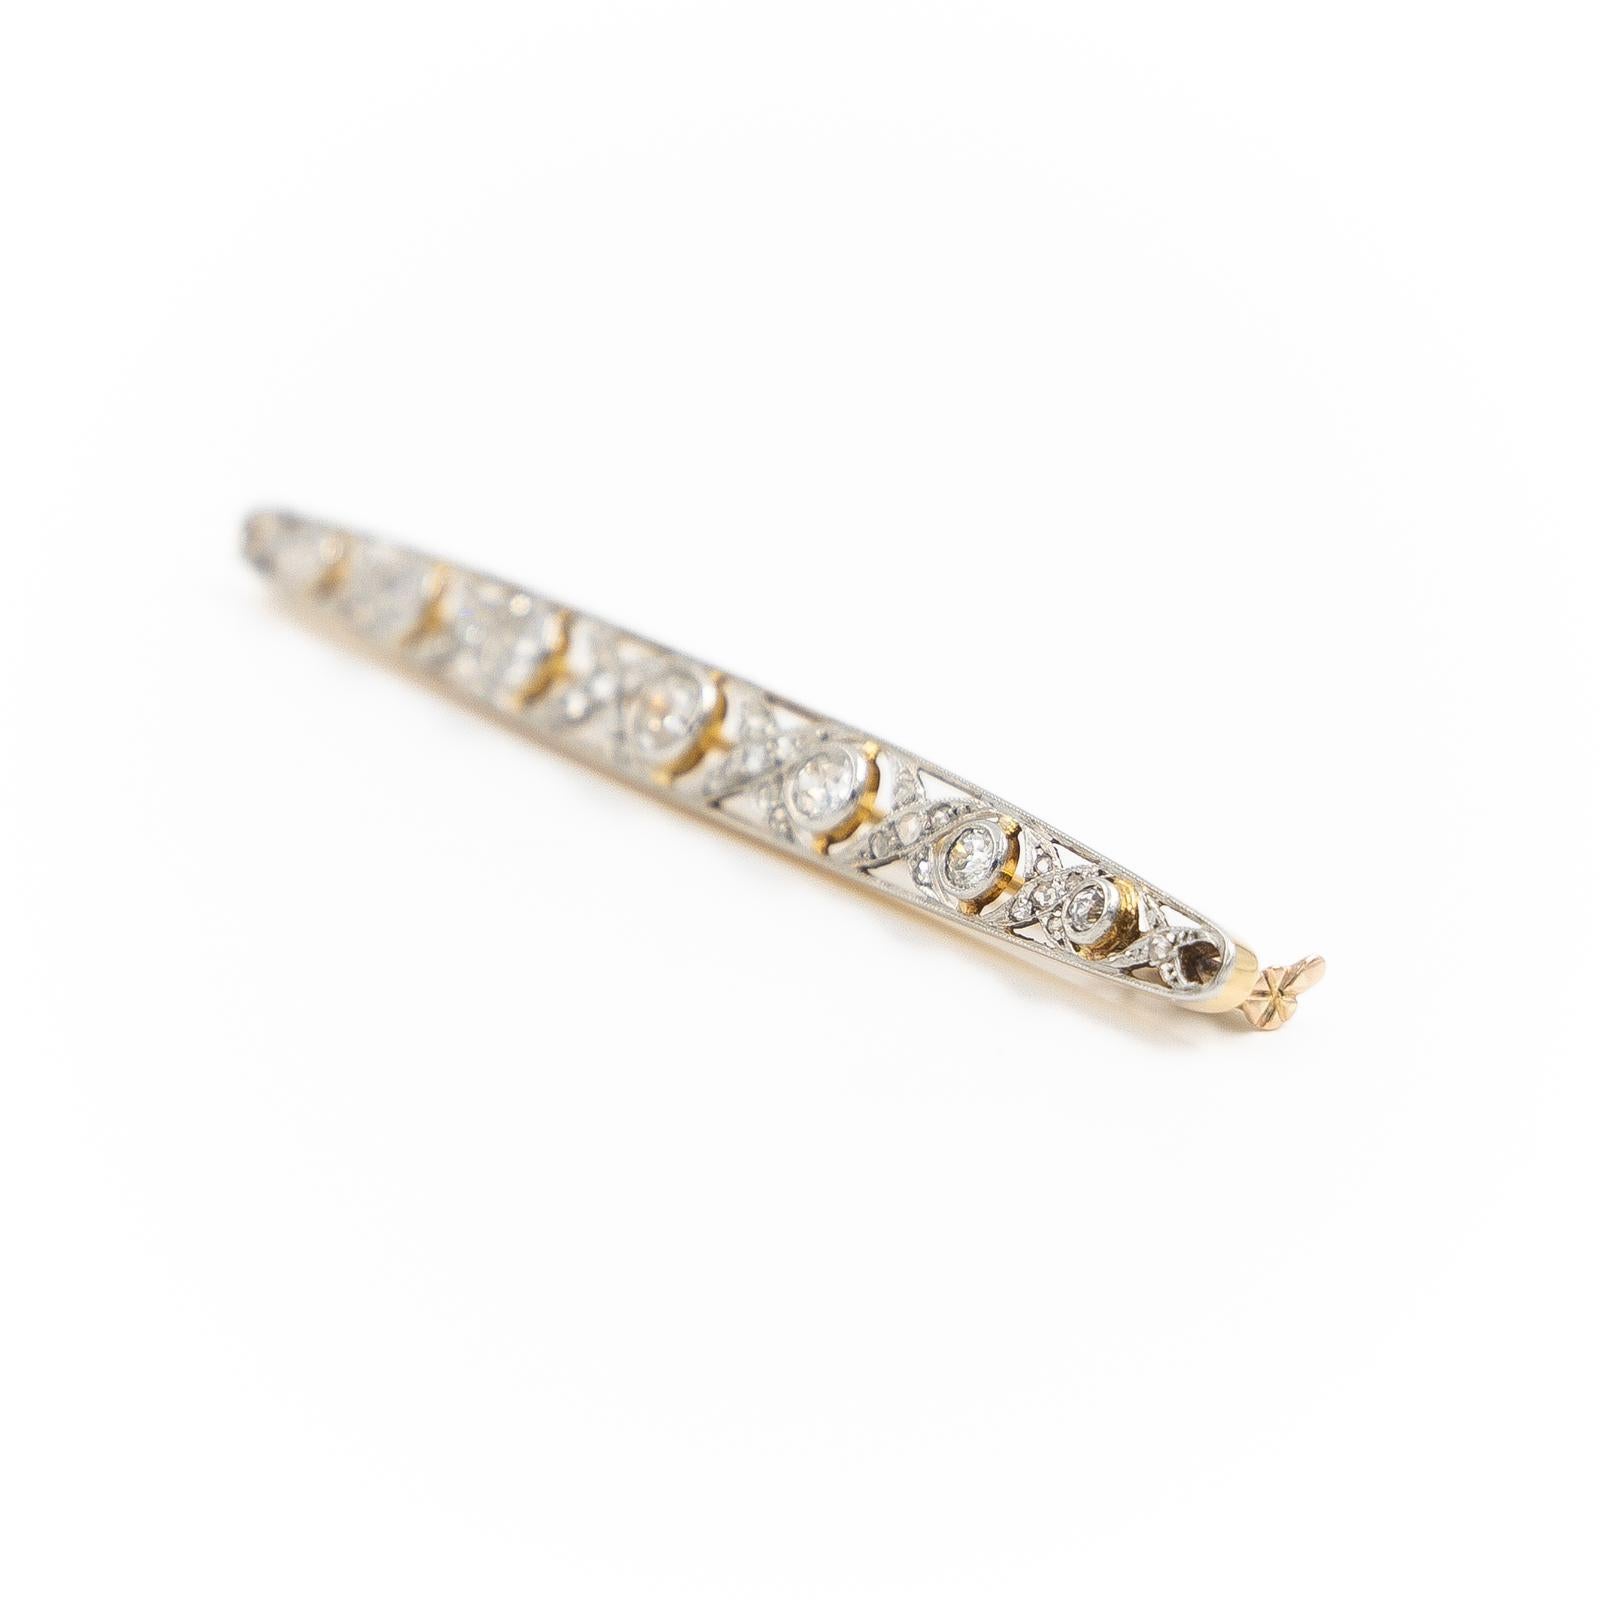 Old European Cut Brooch Yellow Gold Diamond For Sale